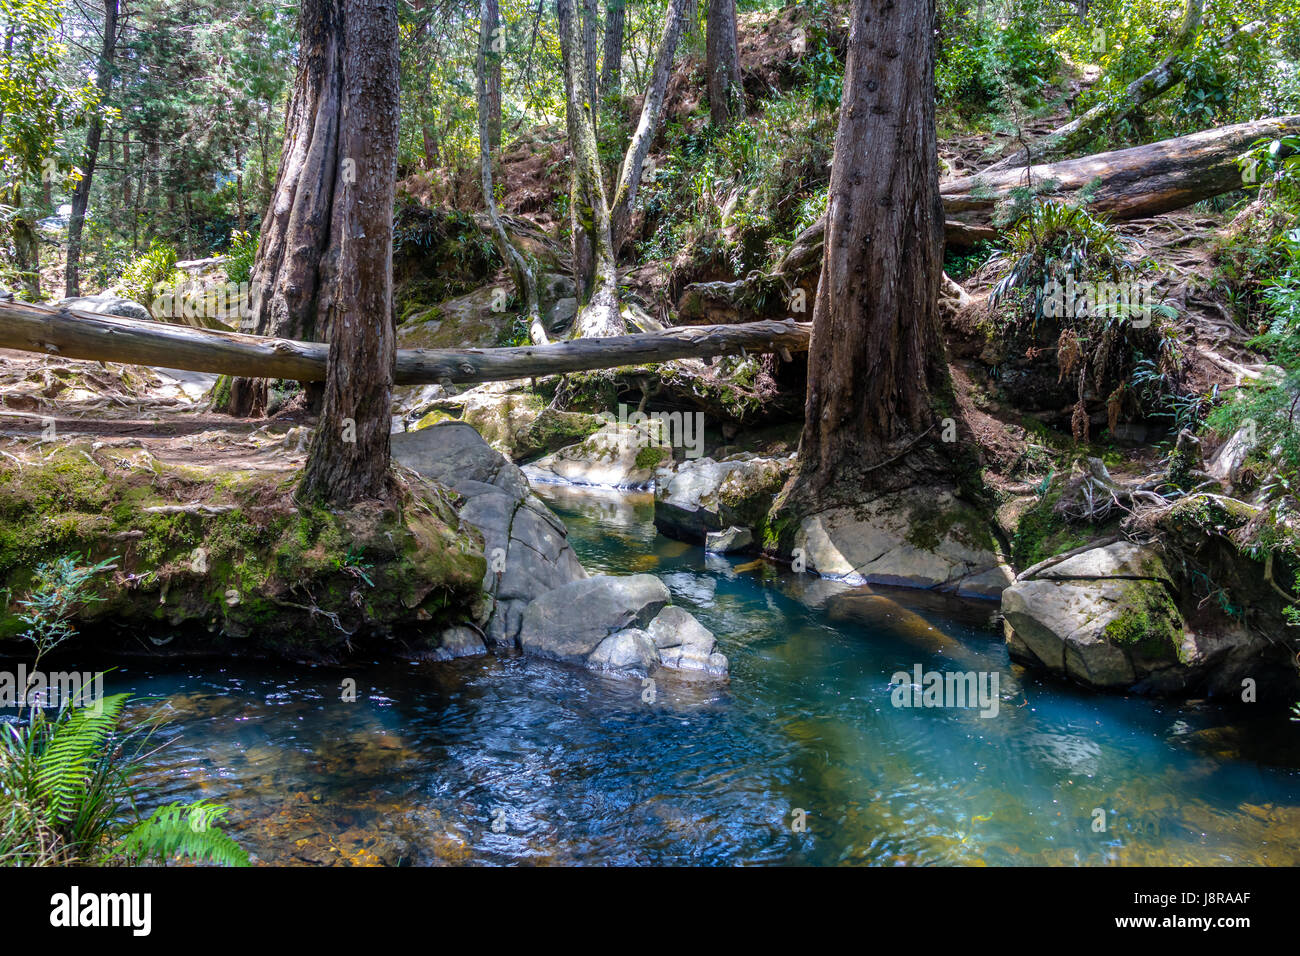 River and woods at Arvi Park - Medellin, Antioquia, Colombia Stock Photo